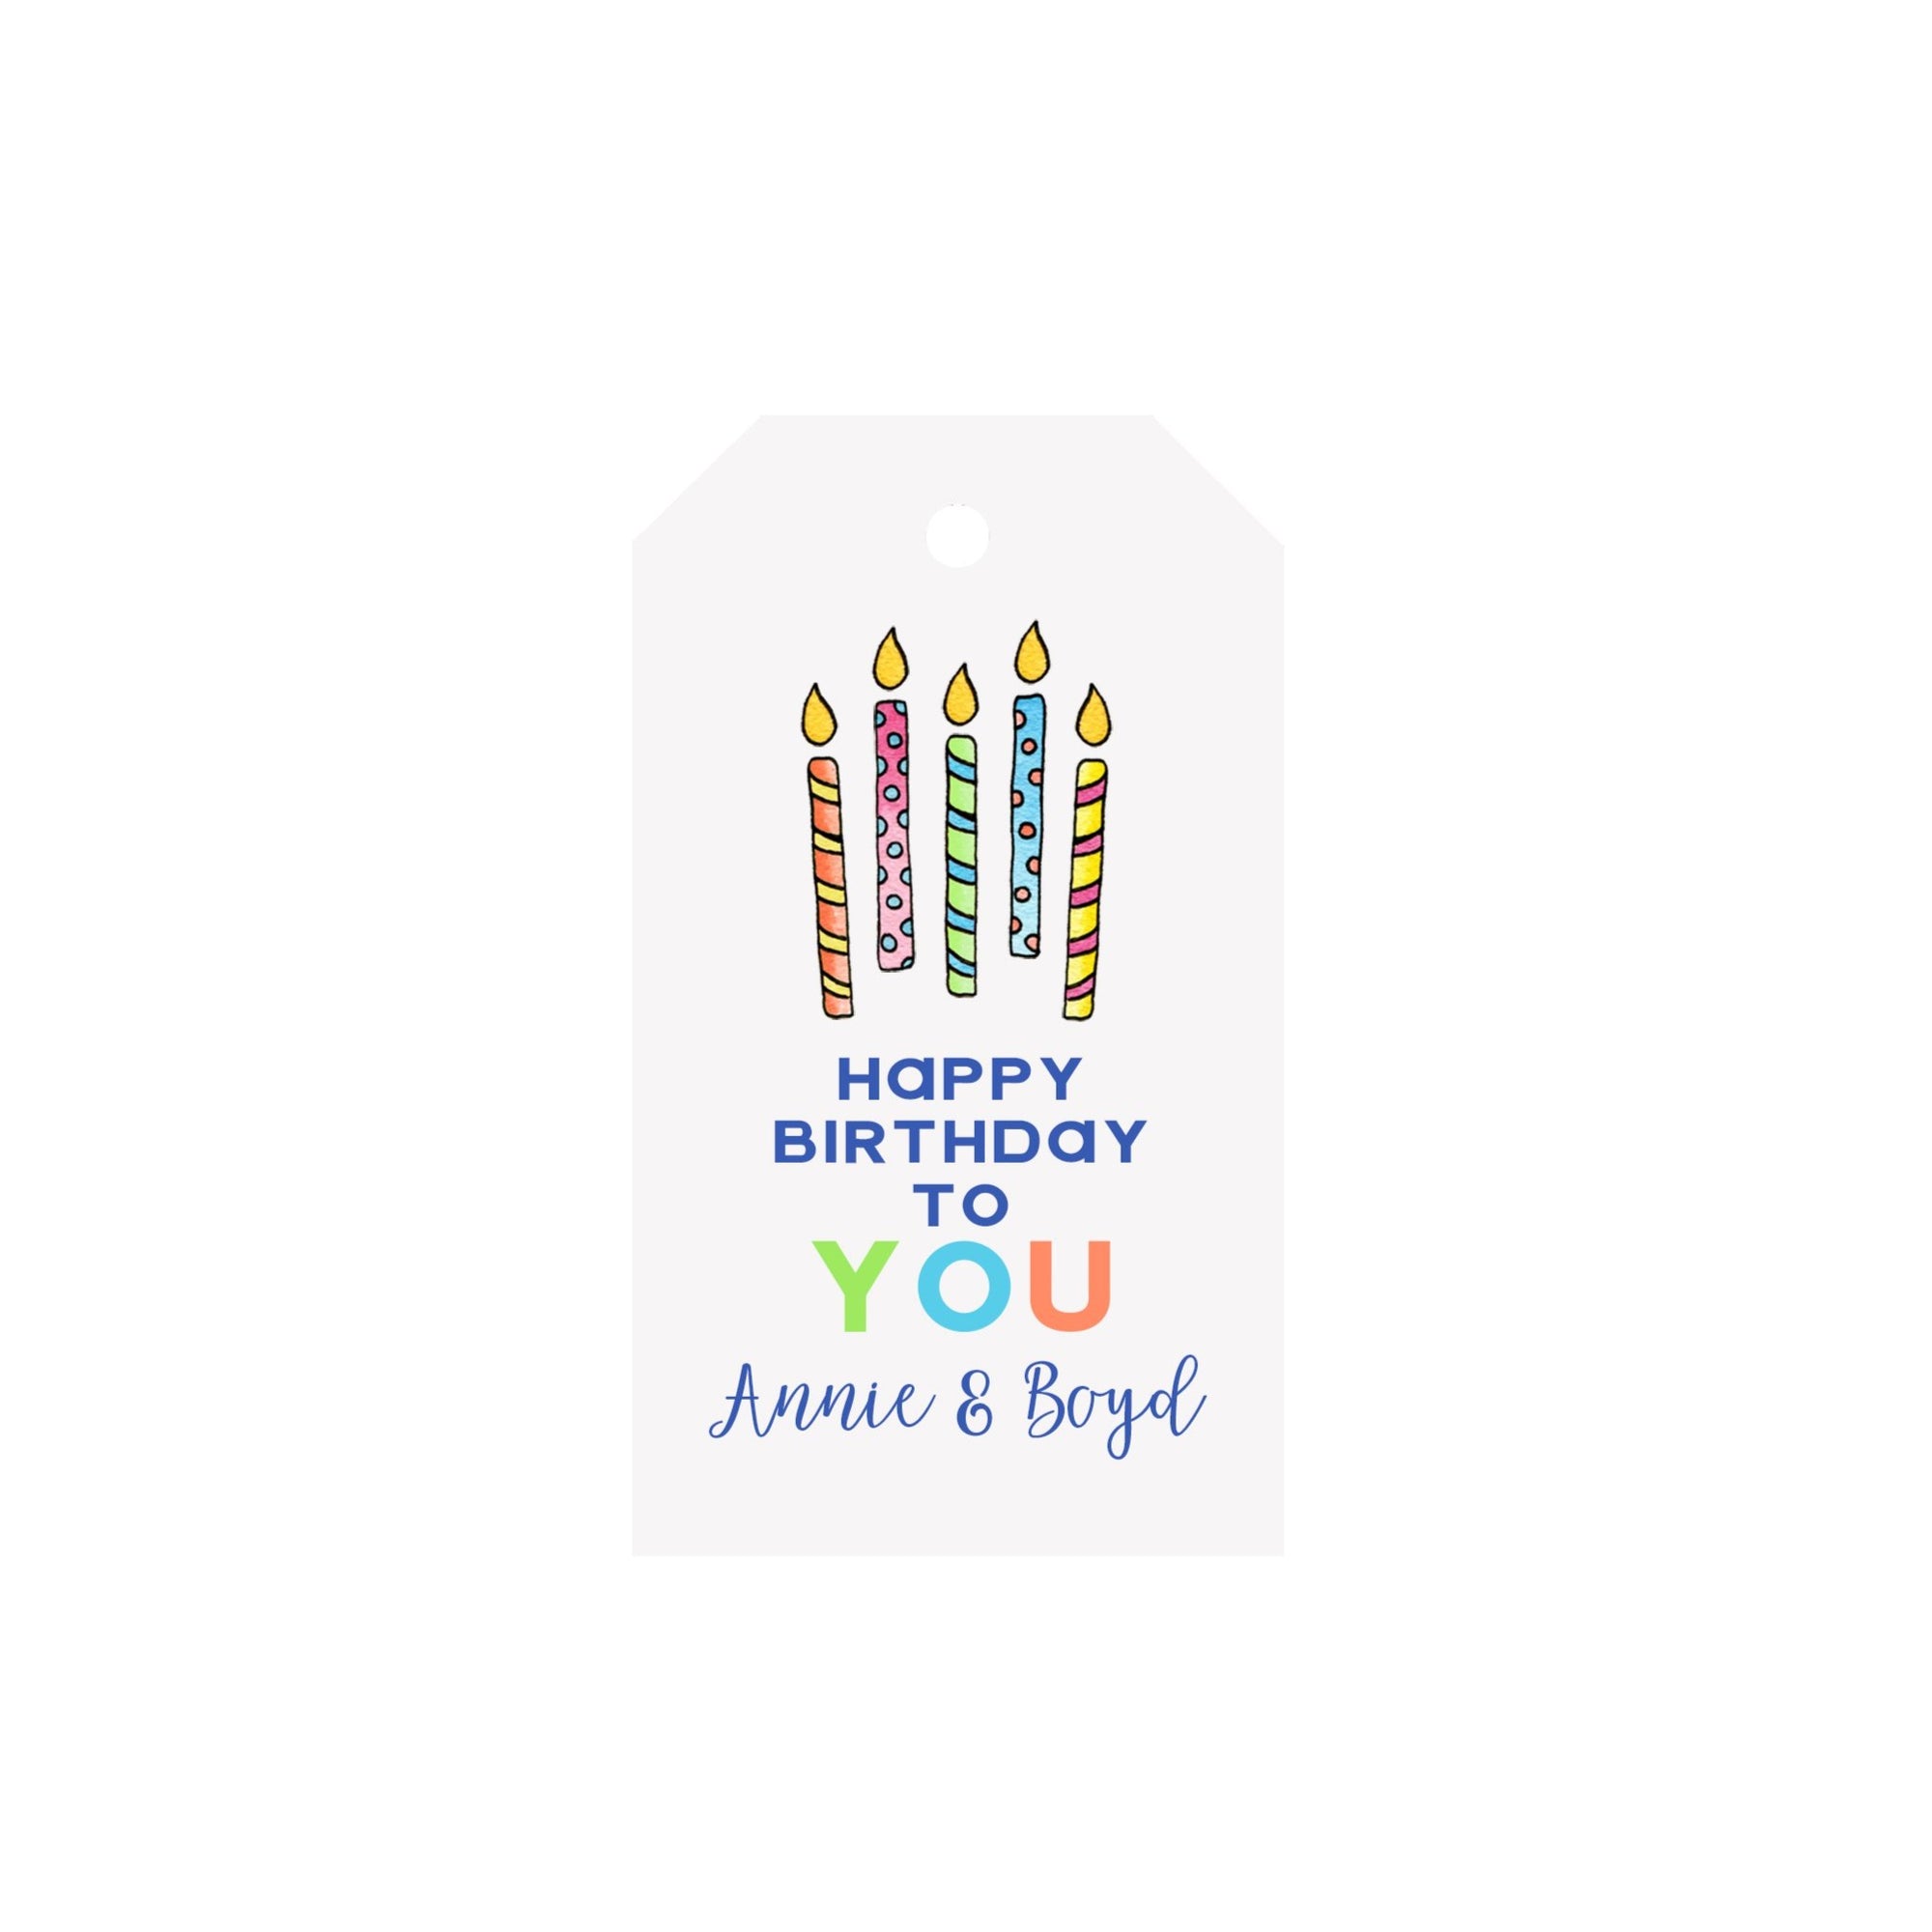 Birthday Candles Personalized Angled/Drilled Gift Tags